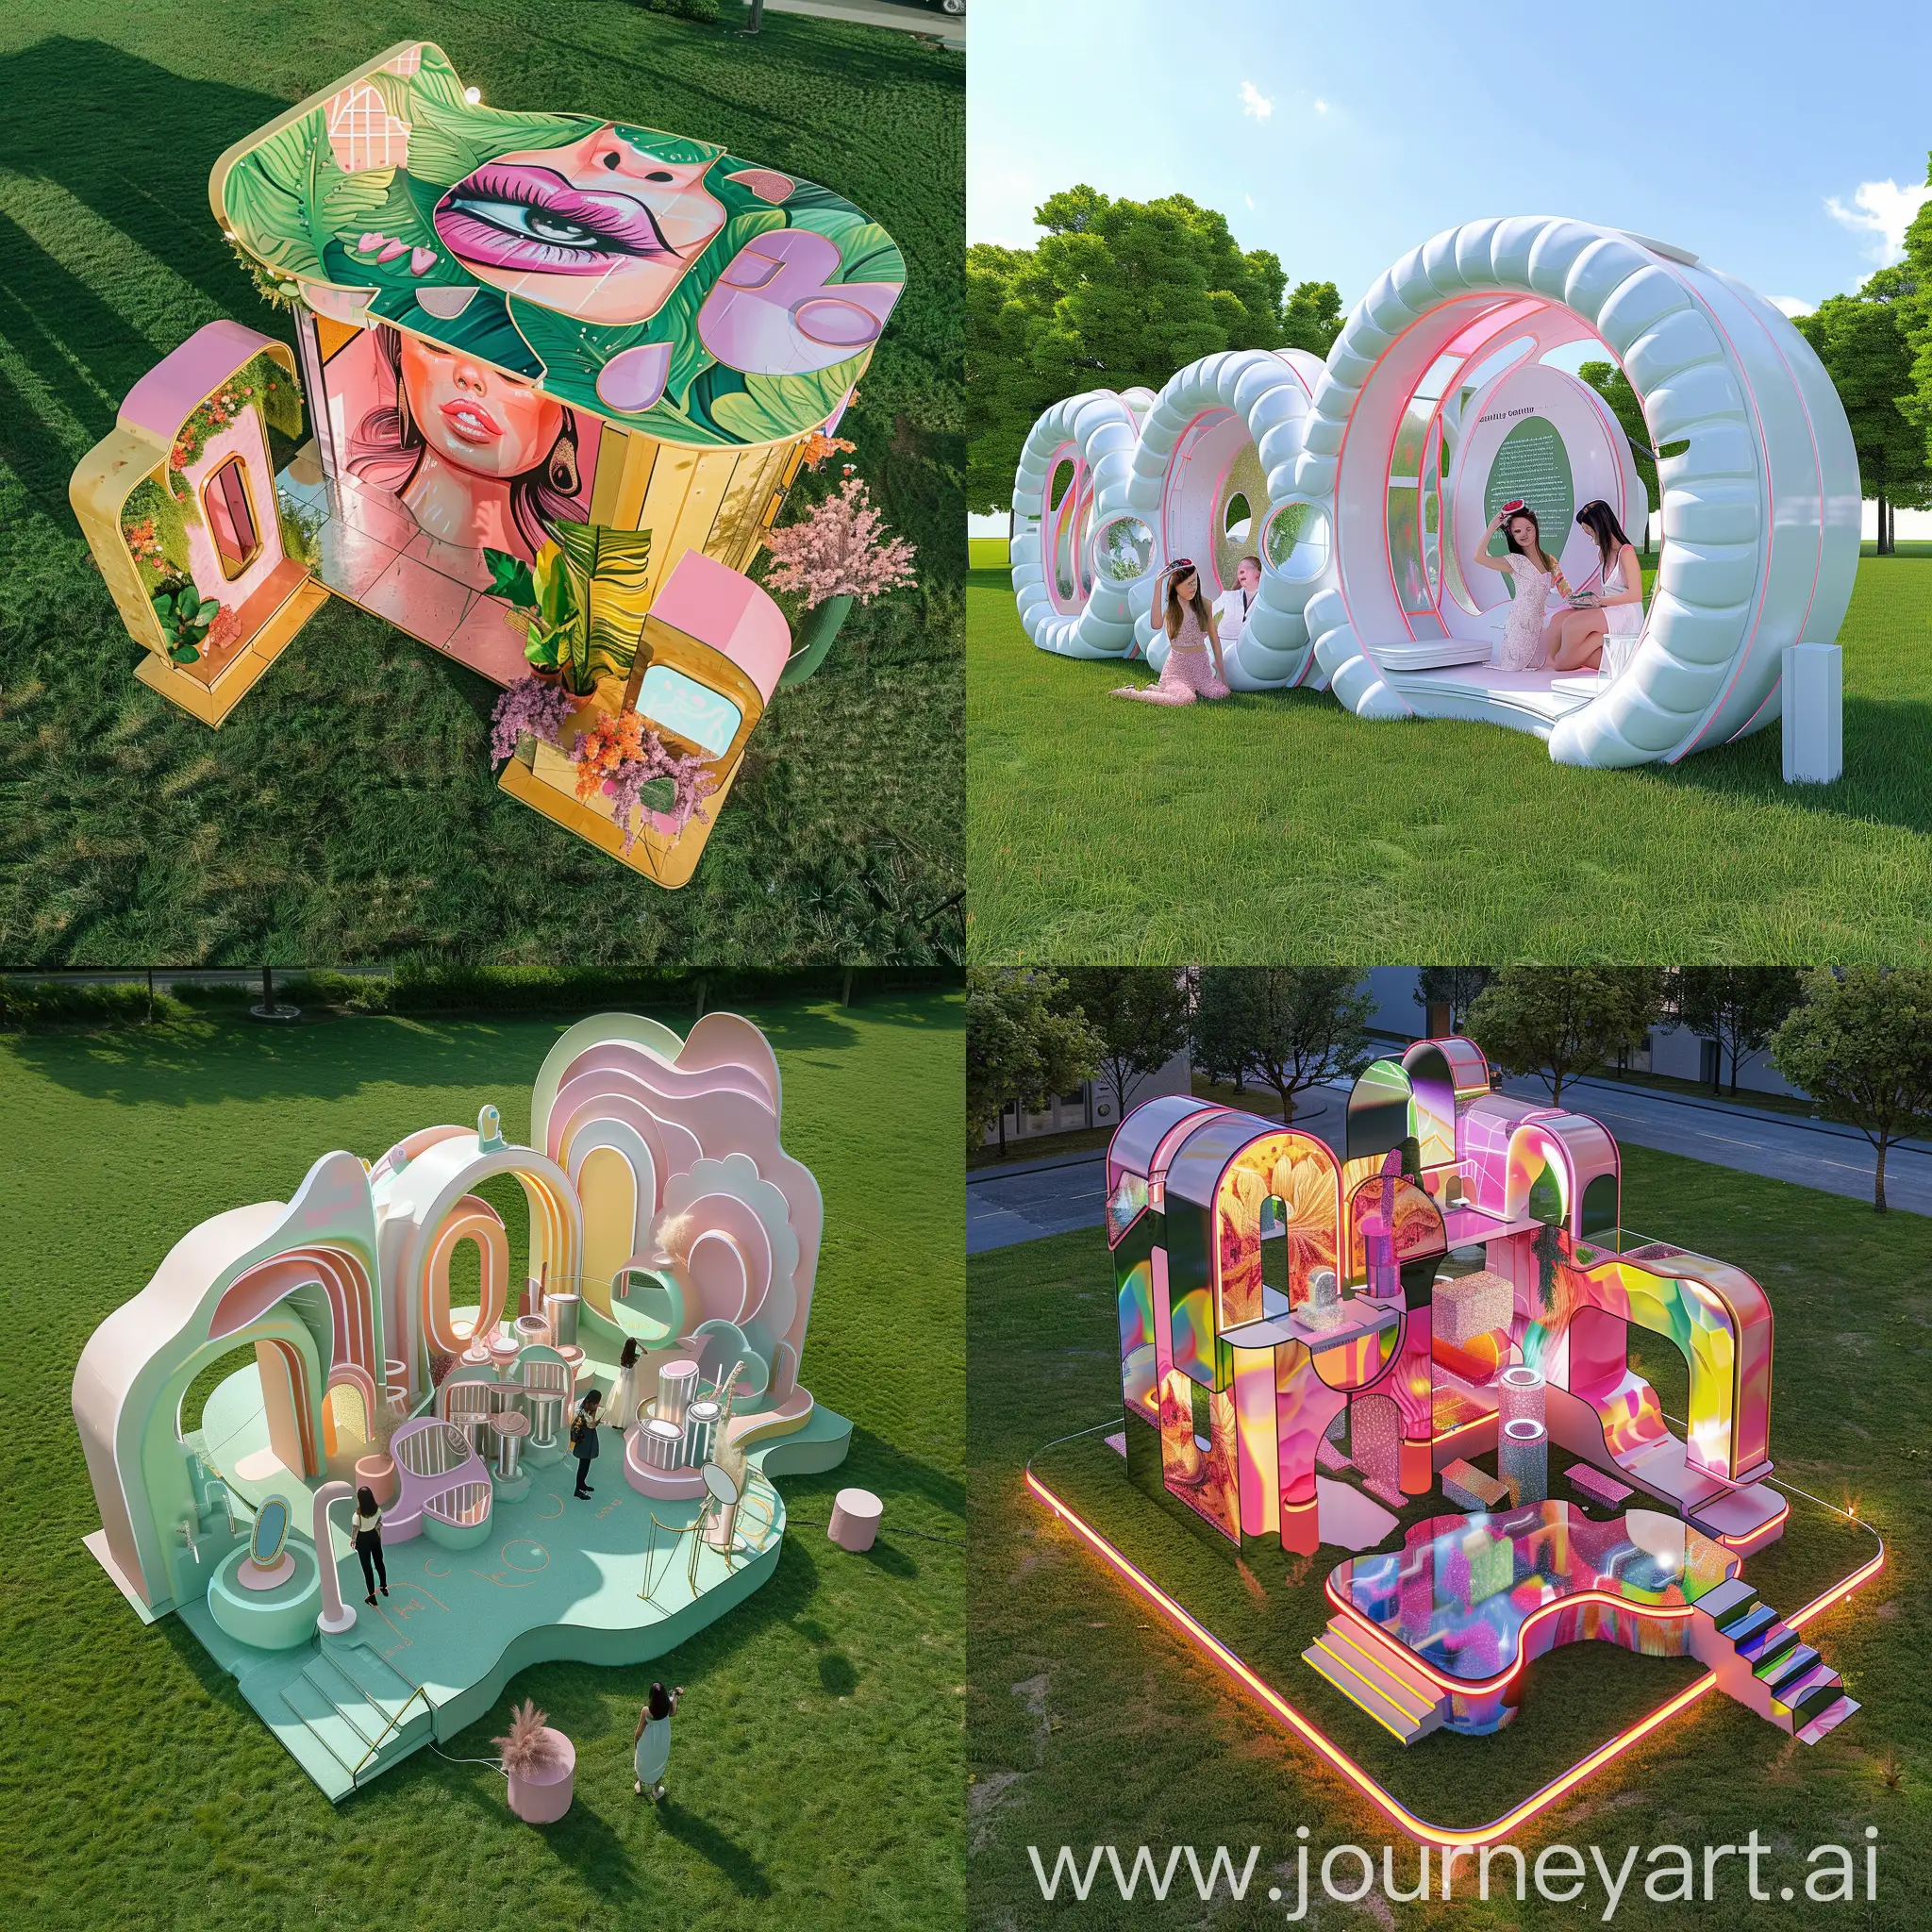 Interactive-Beautythemed-Sculpture-on-Grassy-Field-for-Group-Photography